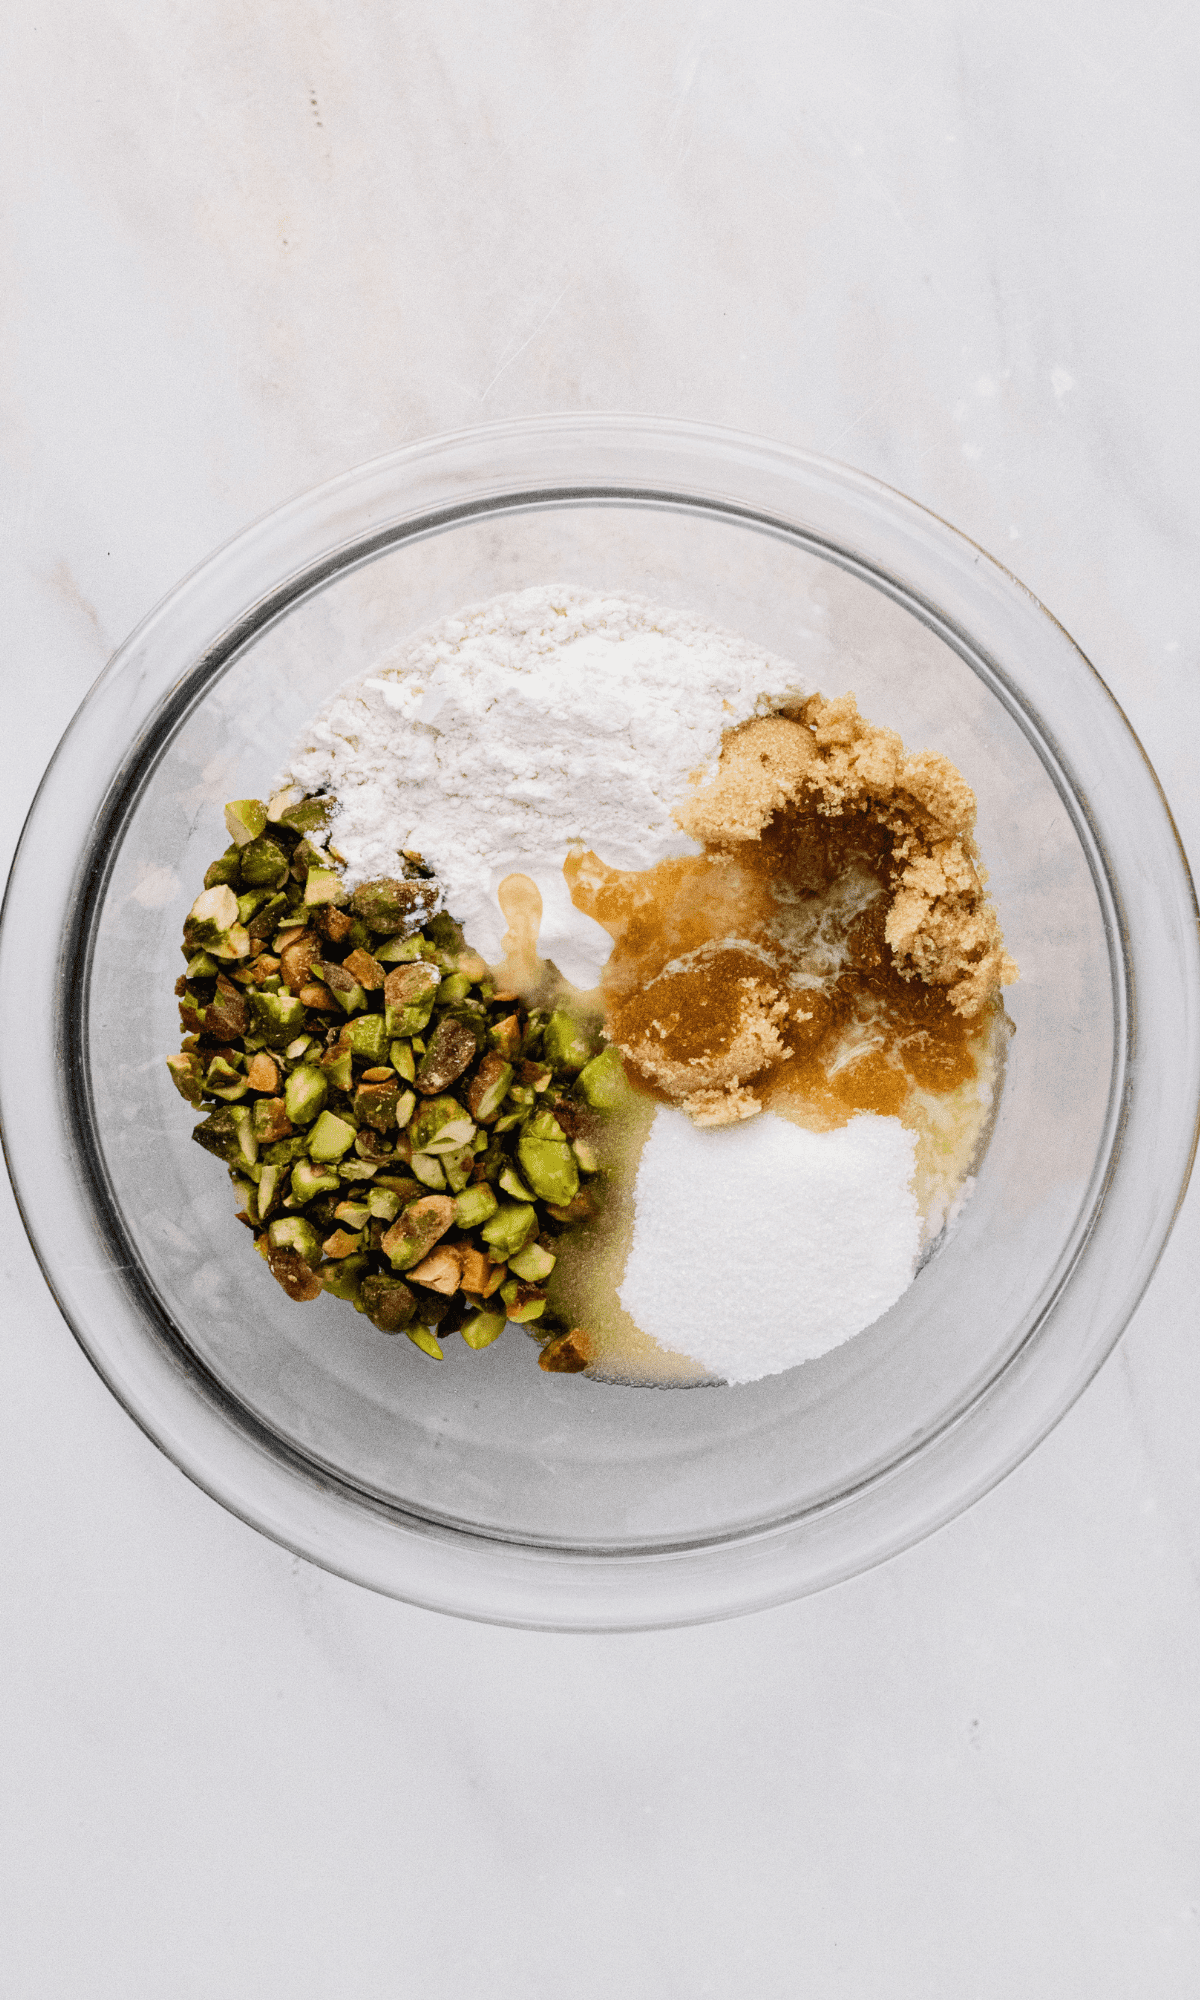 Overhead shot of pistachio crumble ingredients prior to mixing together.